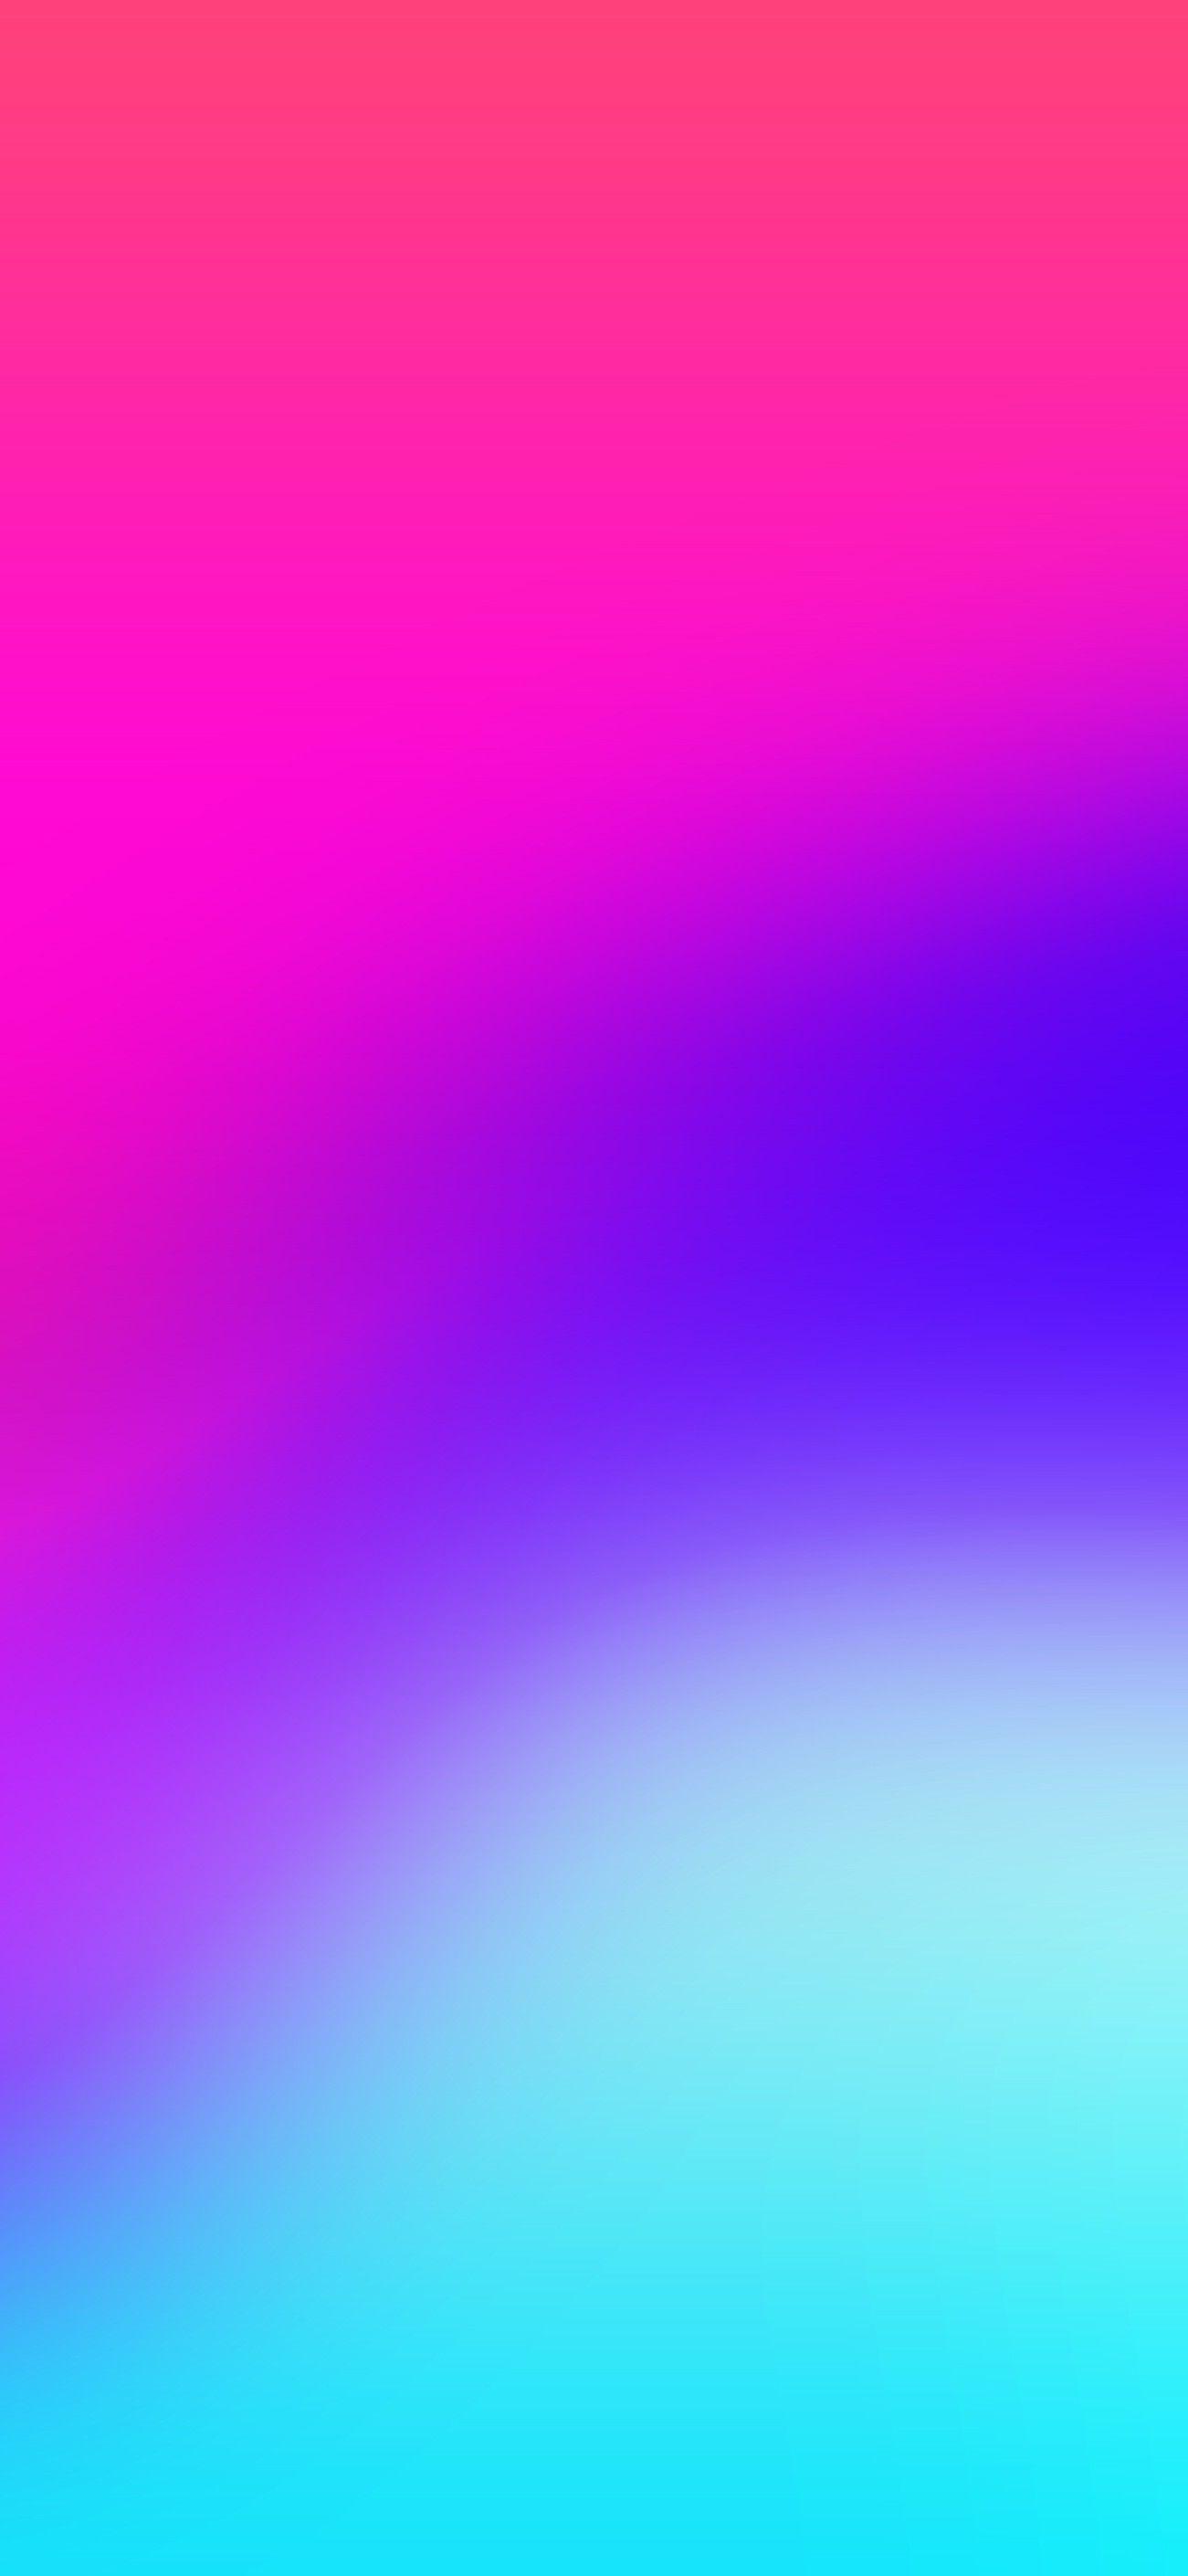 Pink and Blue iPhone Wallpapers - Top